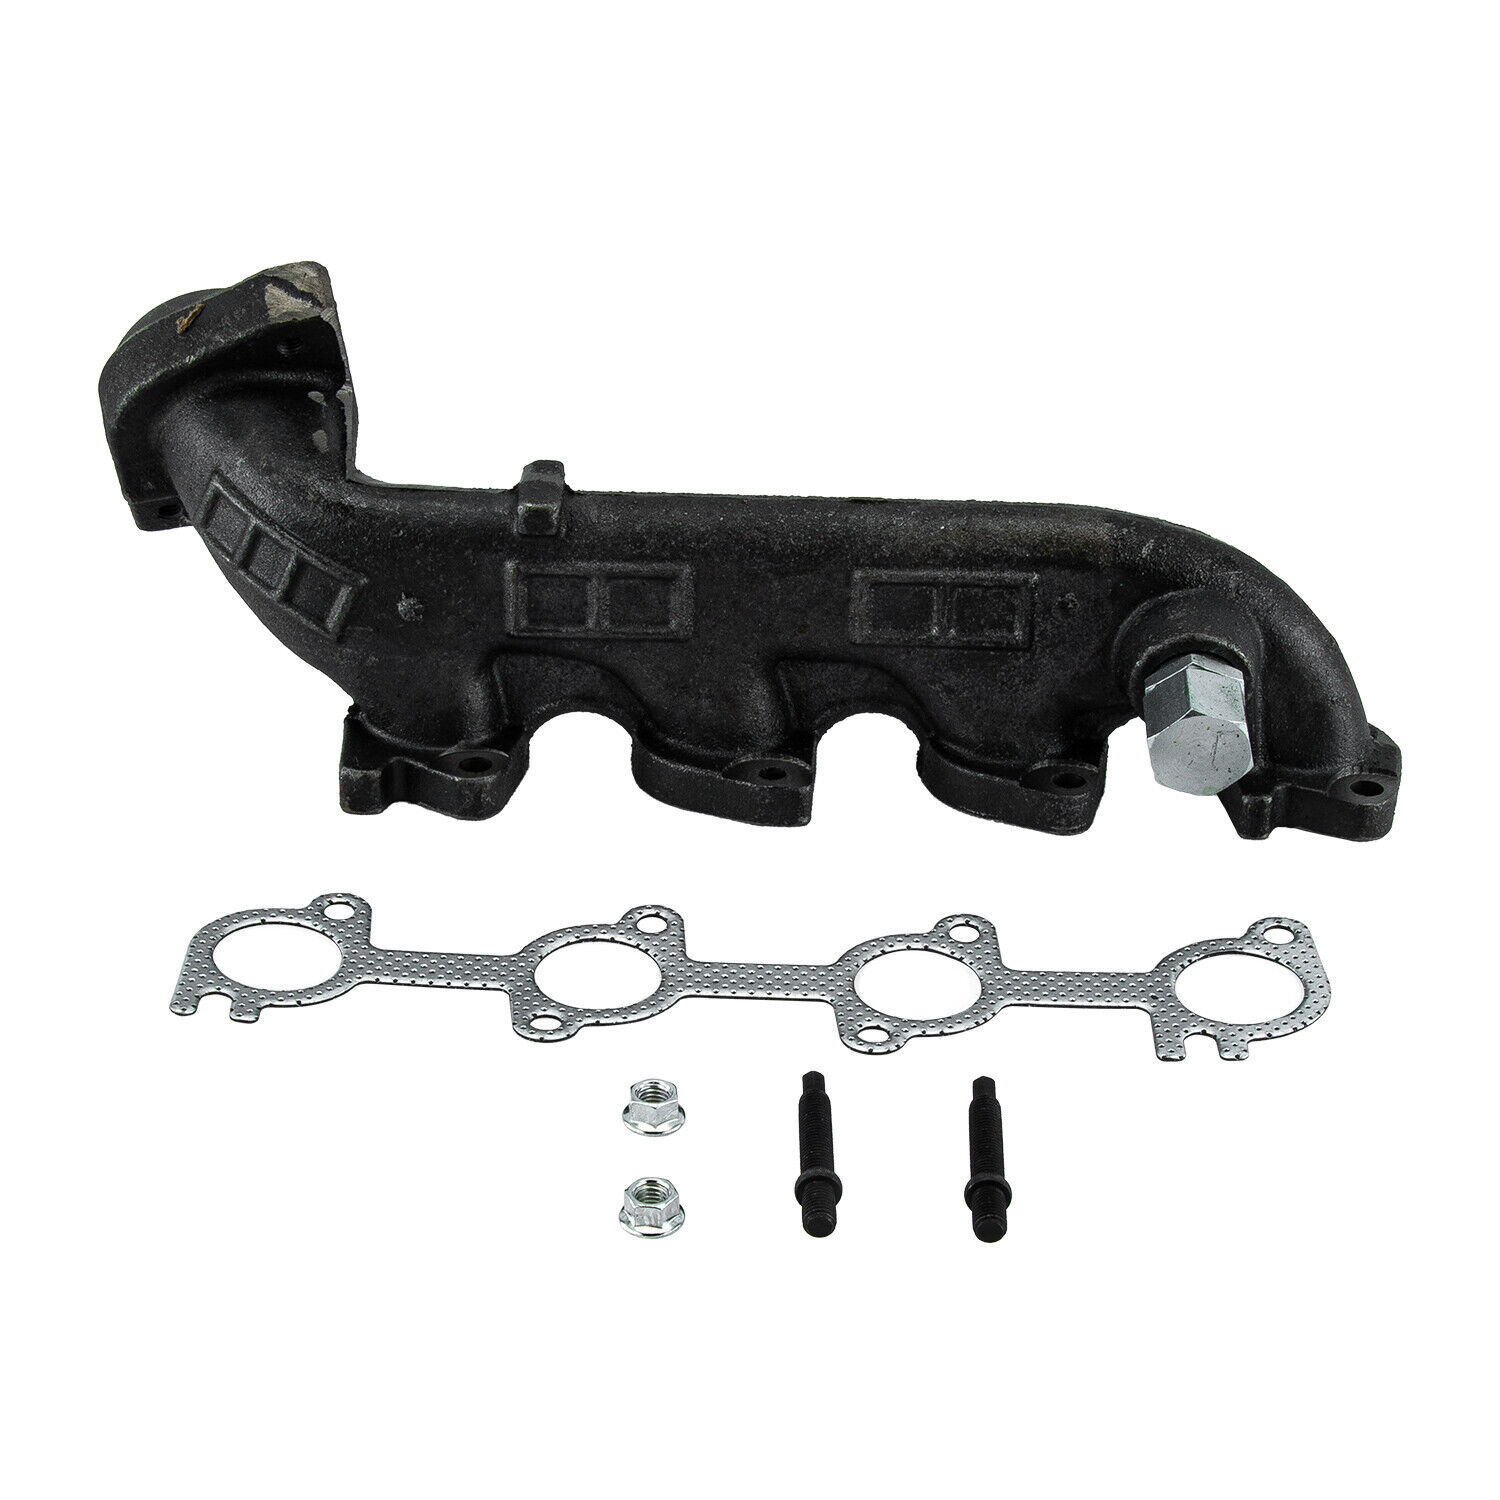 Left Exhaust Manifold Driver Side Fits Ford F250 F350 Excursion Van 2000-16 DD